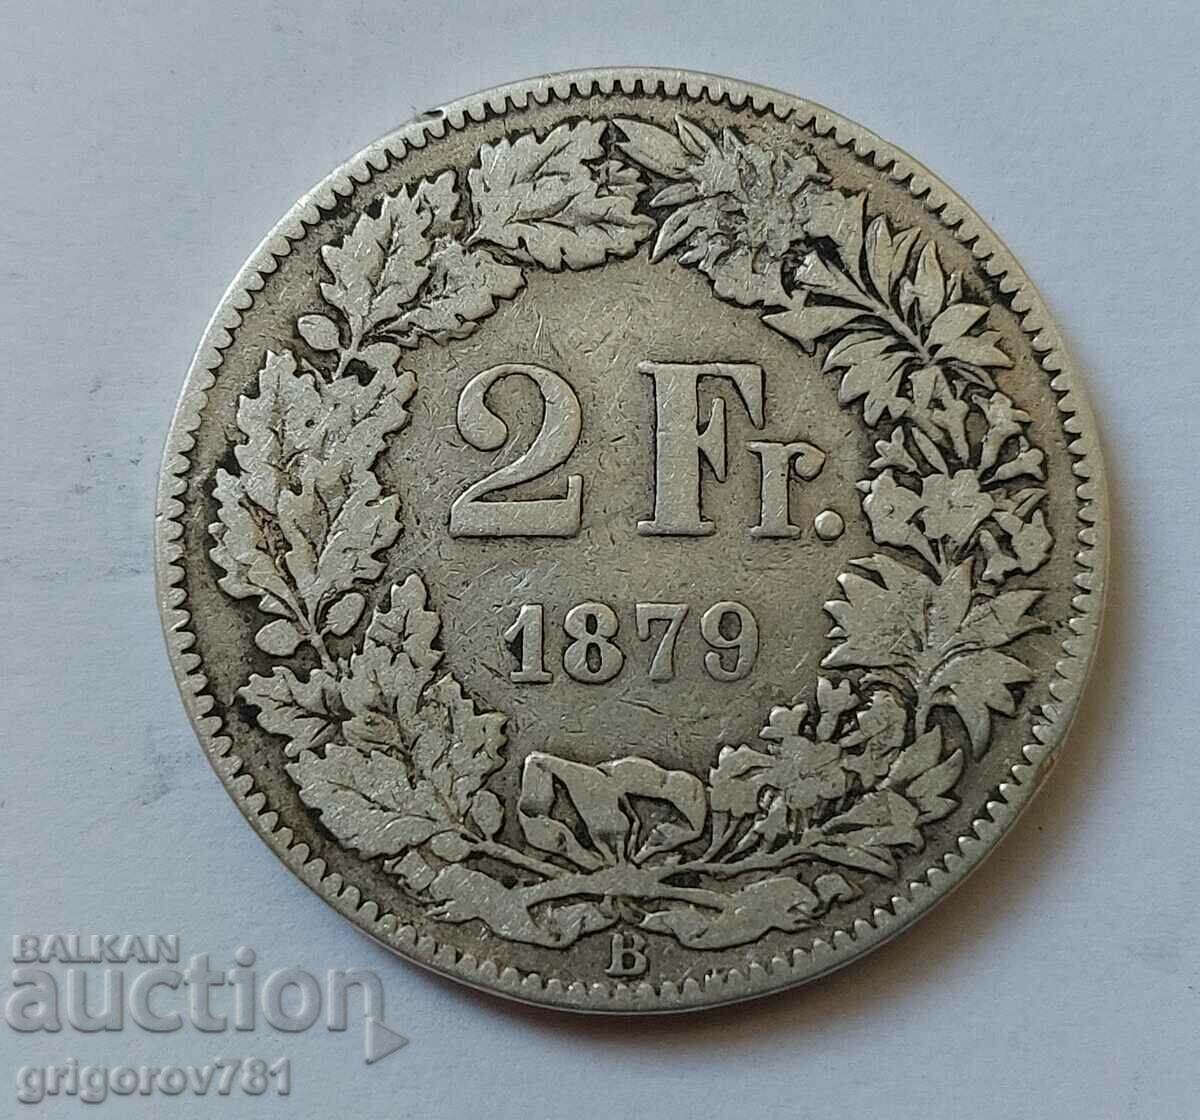 2 francs silver Switzerland 1879 B - silver coin